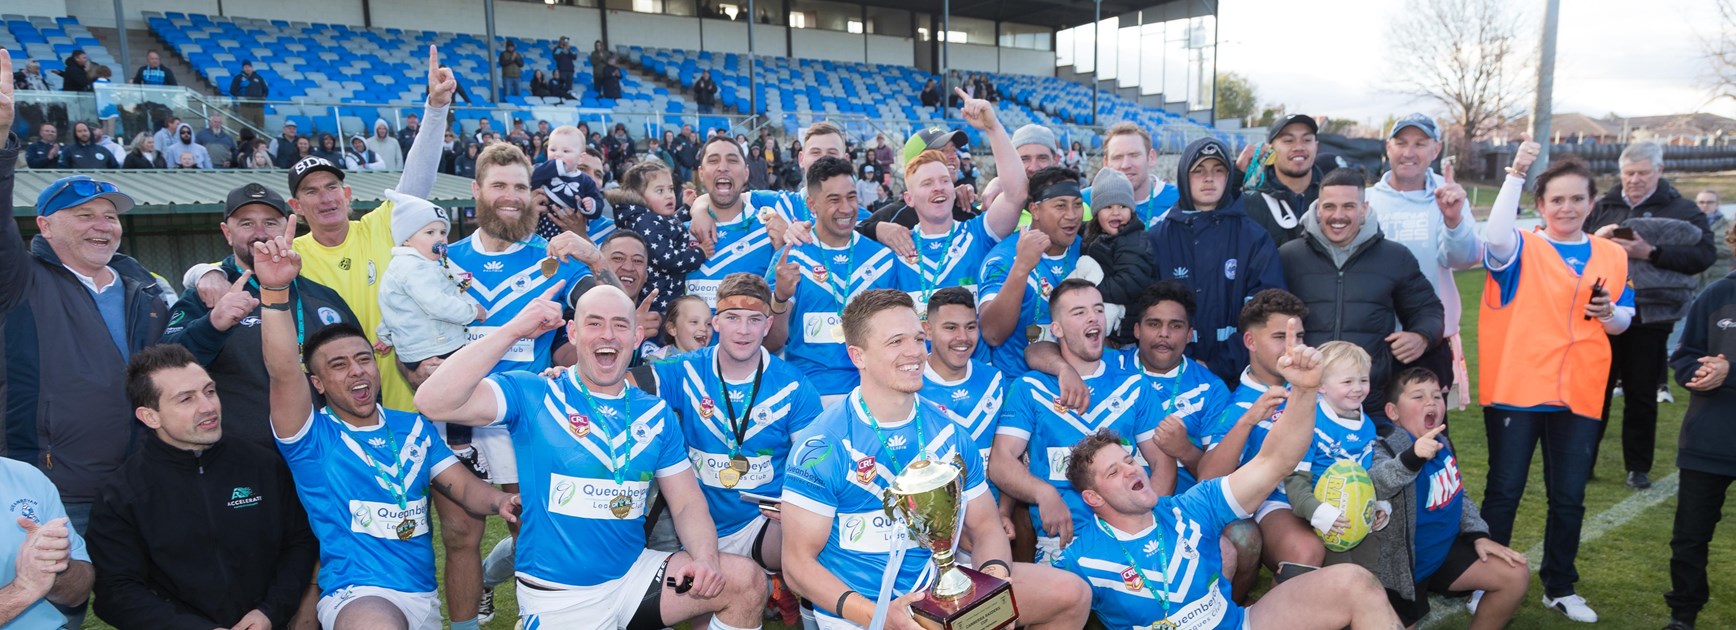 Queanbeyan Blues win 2019 Blumers Lawyers Canberra Raiders Cup